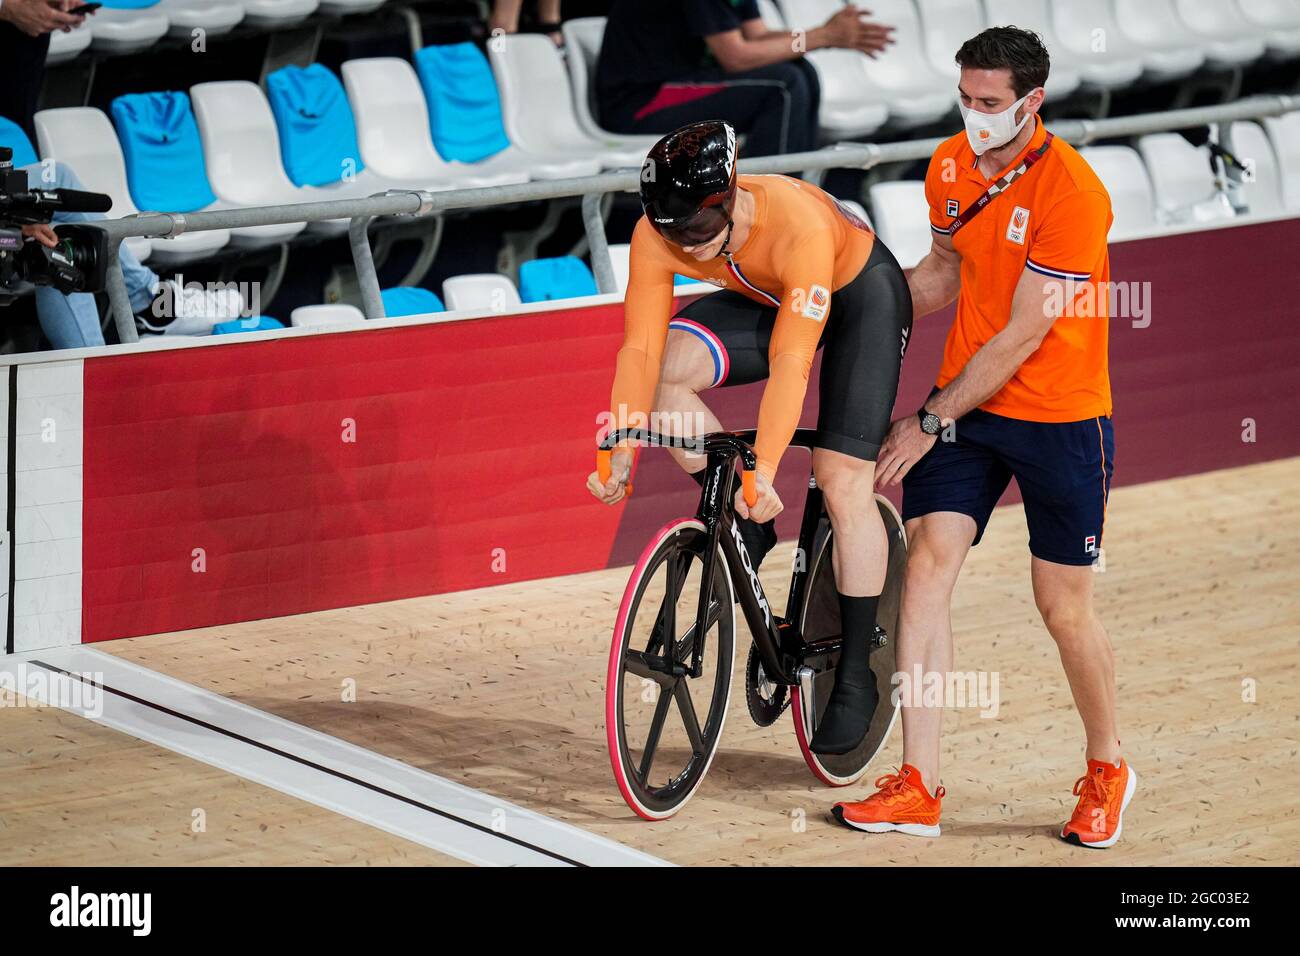 TOKYO, JAPAN - AUGUST 4: Harrie Lavreysen of the Netherlands competing on Men's Sprint 1/8 Finals during the Tokyo 2020 Olympic Games at the Izu Velodrome on August 4, 2021 in Tokyo, Japan (Photo by Yannick Verhoeven/Orange Pictures) NOCNSF Stock Photo